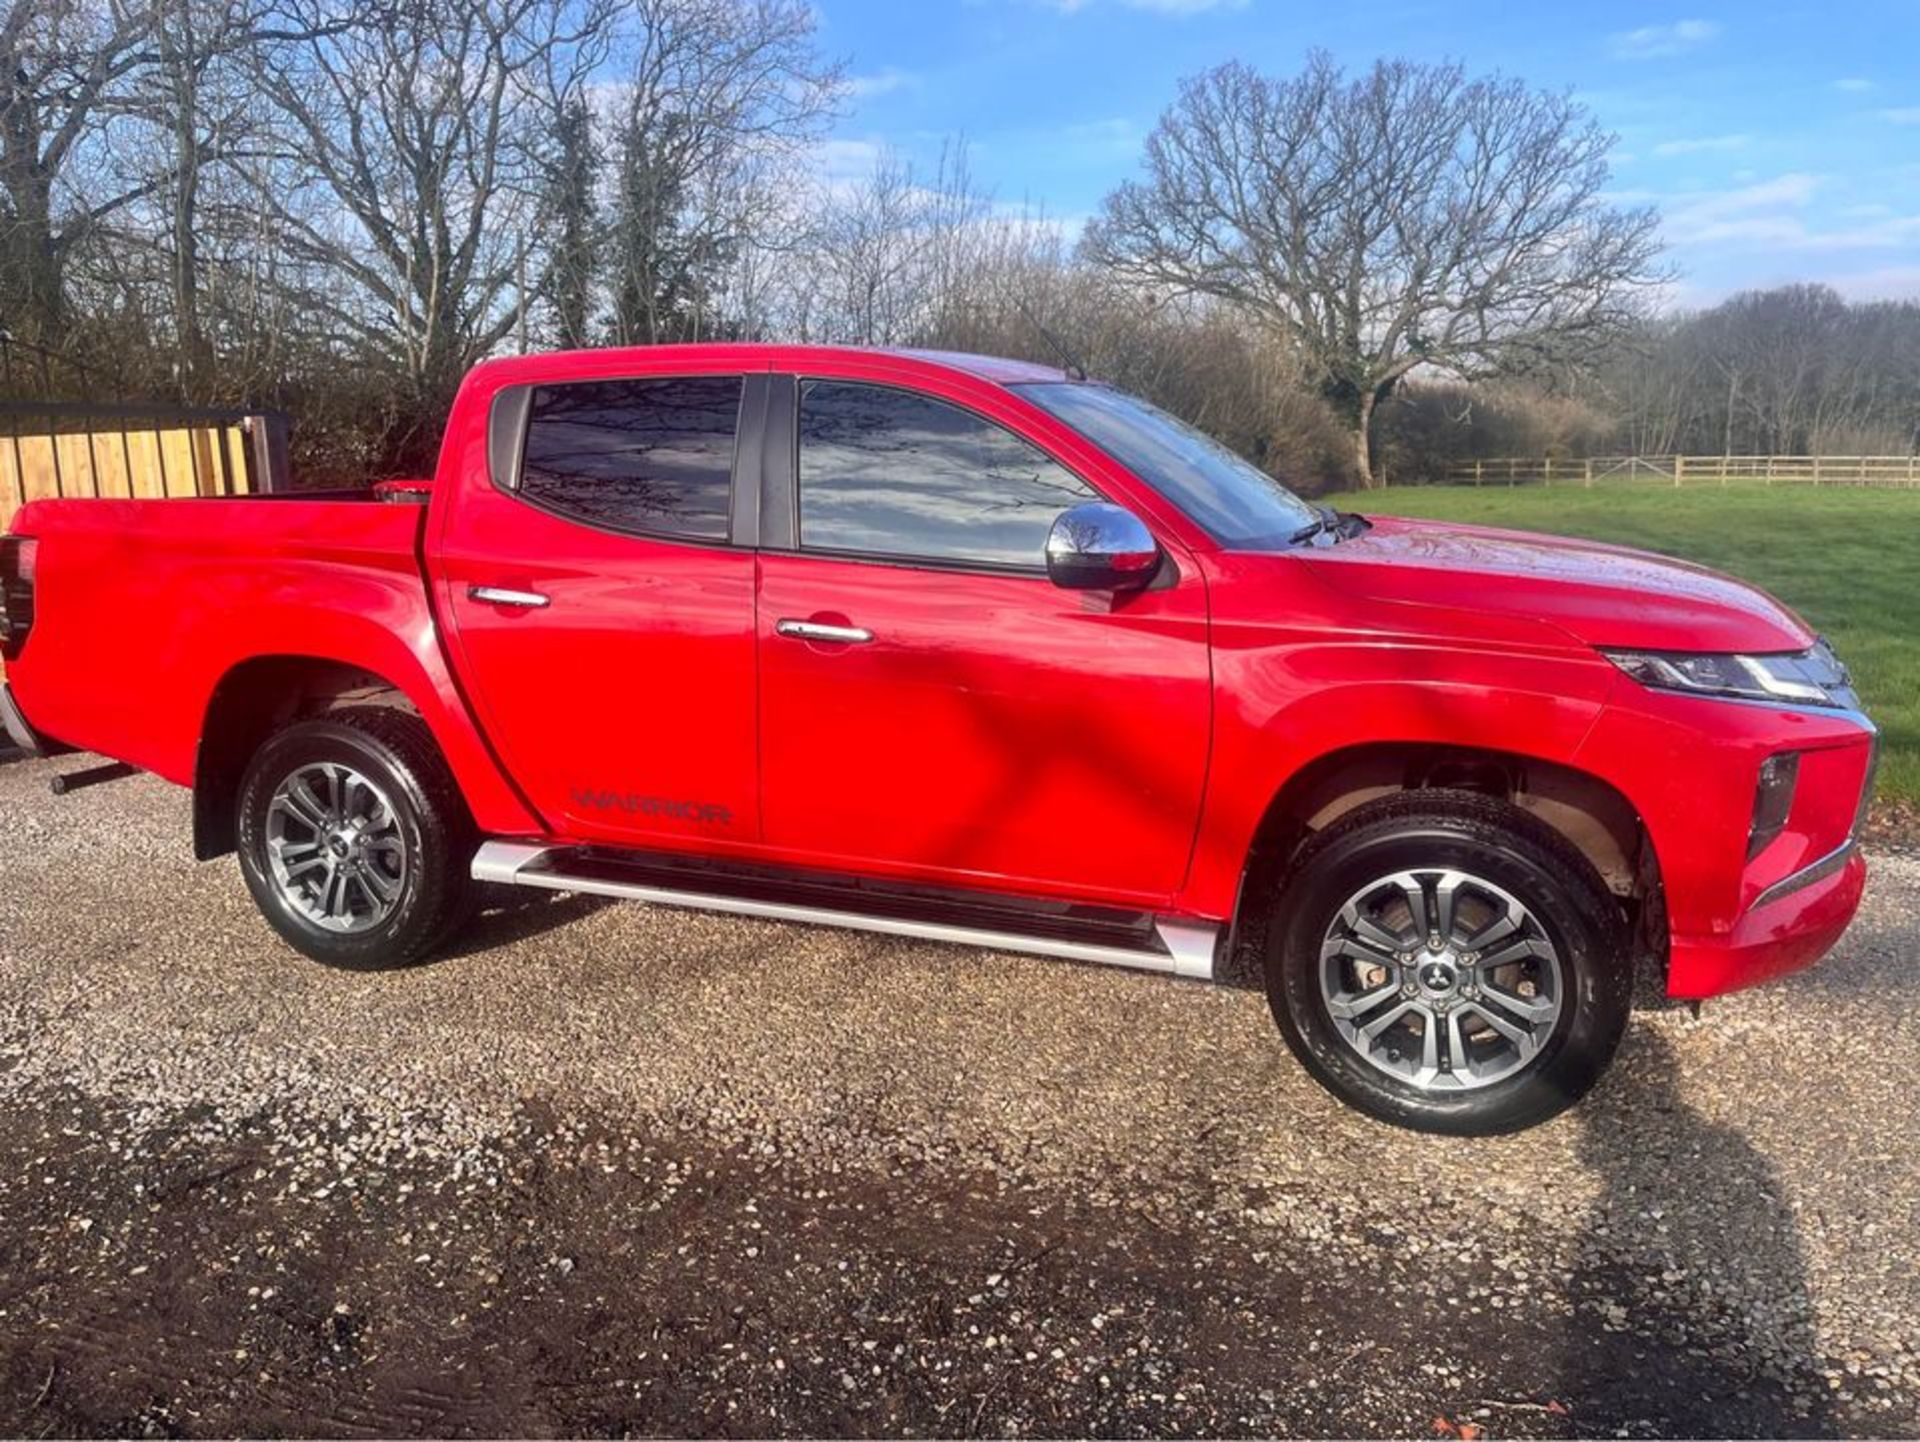 2021 MITSUBISHI - L200 Warrior only (35k miles) - Image 2 of 14